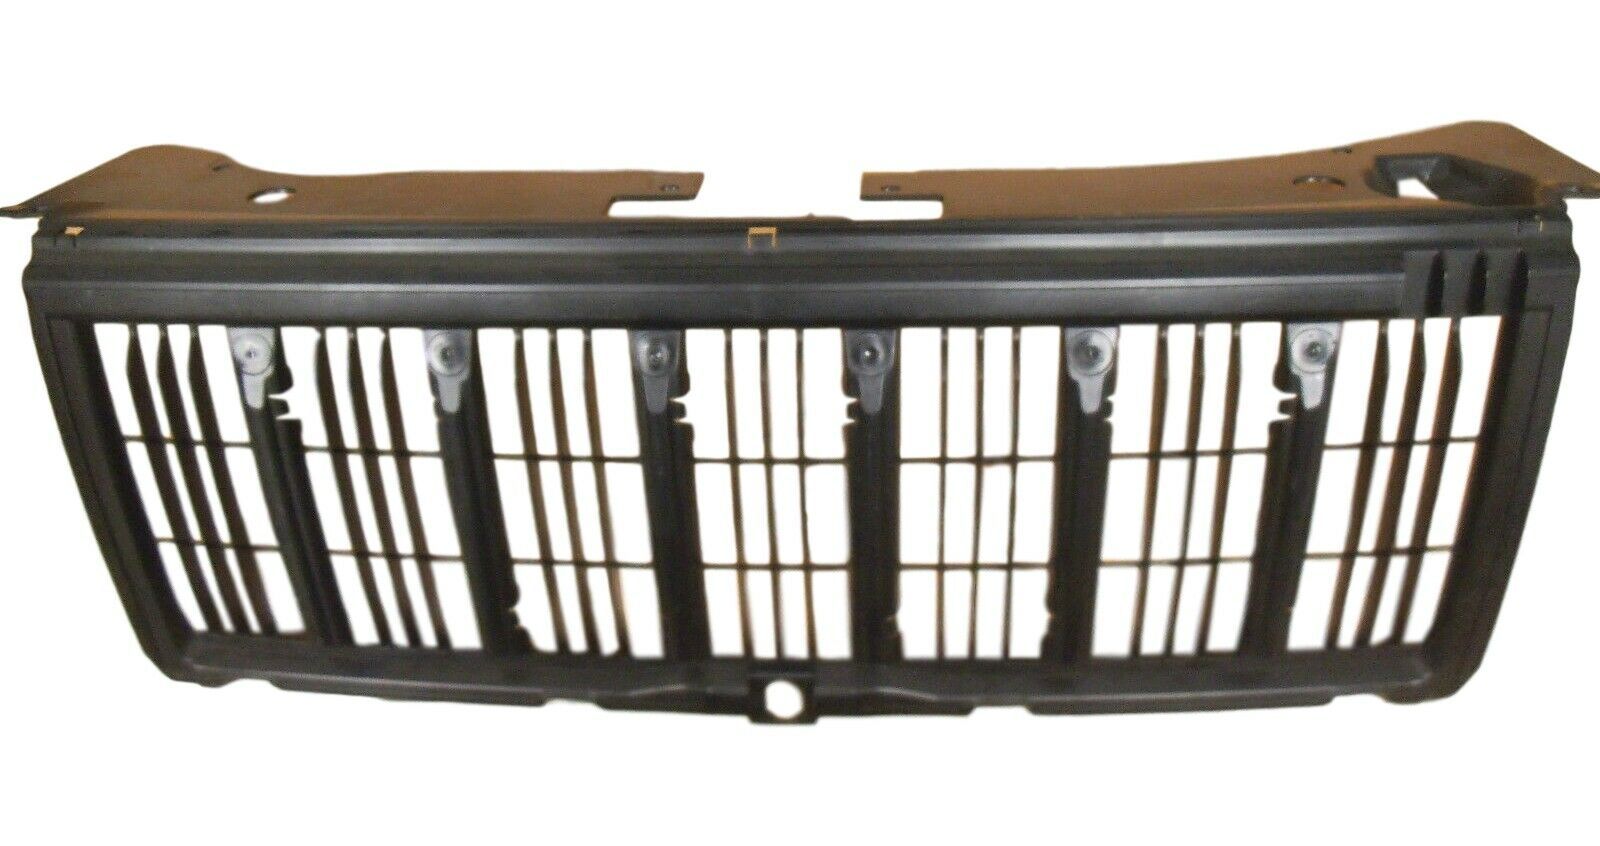 OEM Jeep Front Grill Radiator Assembly DX30165 6722 5JR62TRMAD 11009 - $115.98